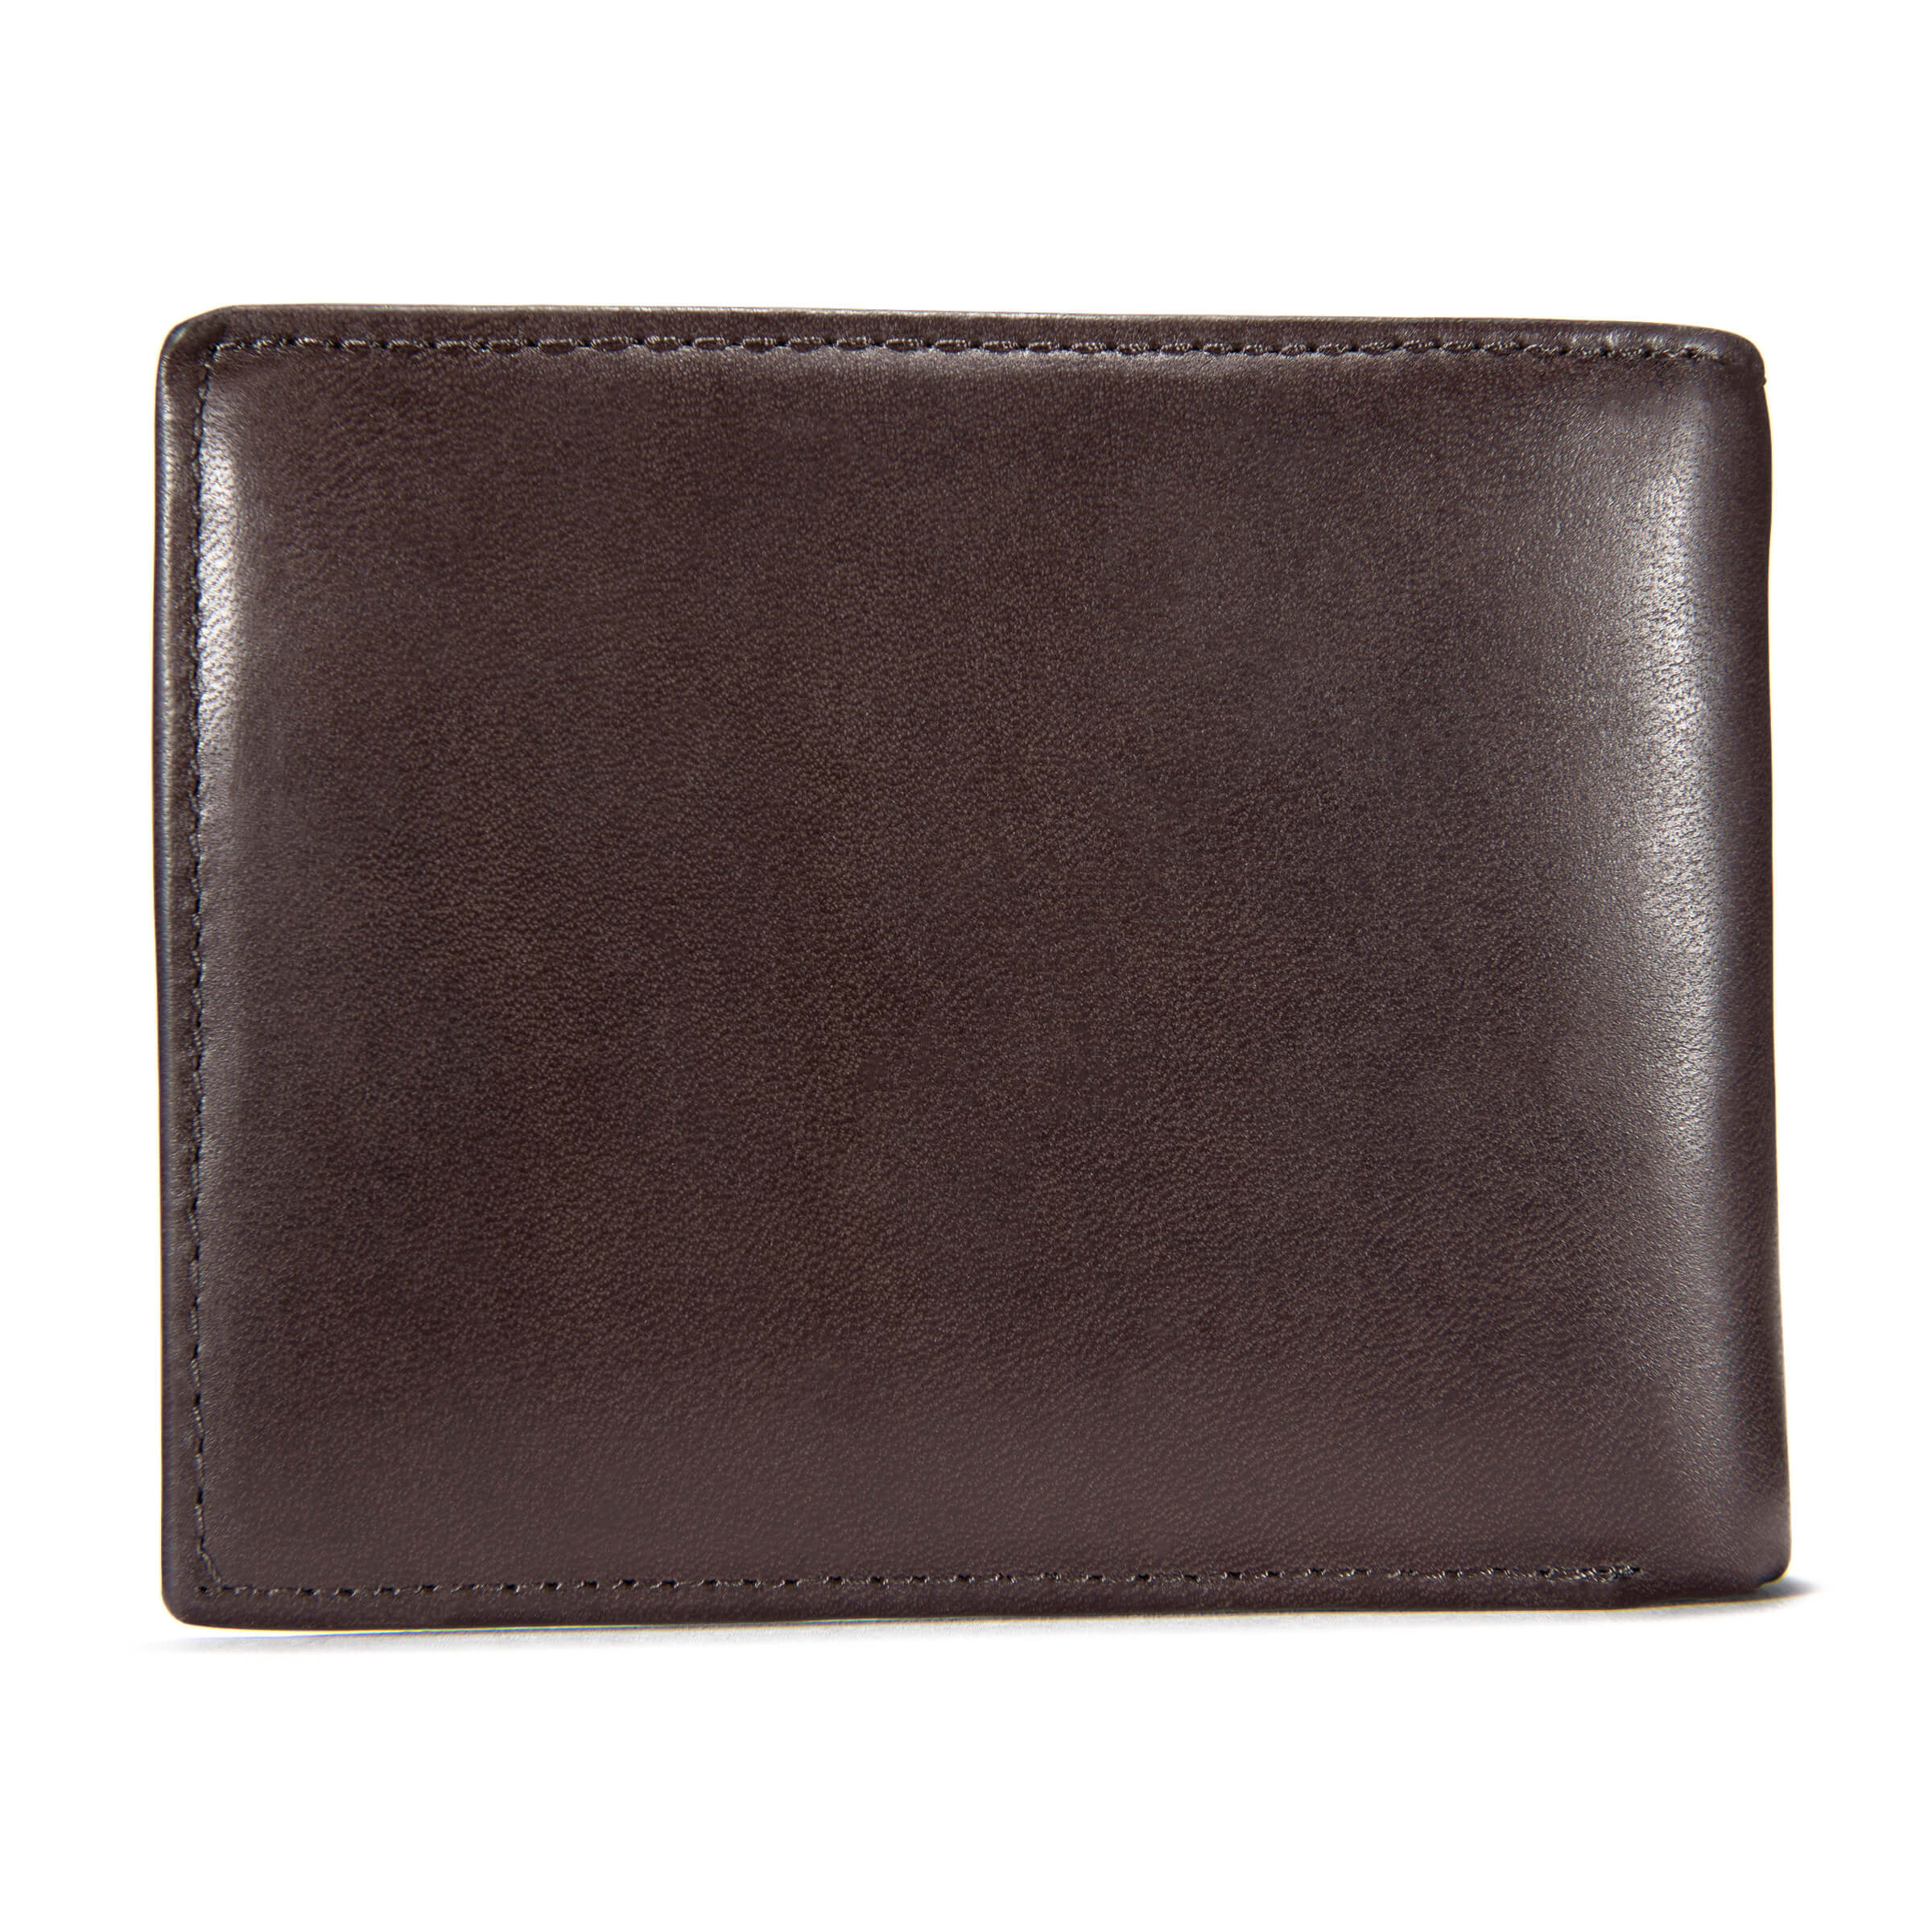 B000021820 - Carhartt Oil Tan Leather Passcase Wallet Brown